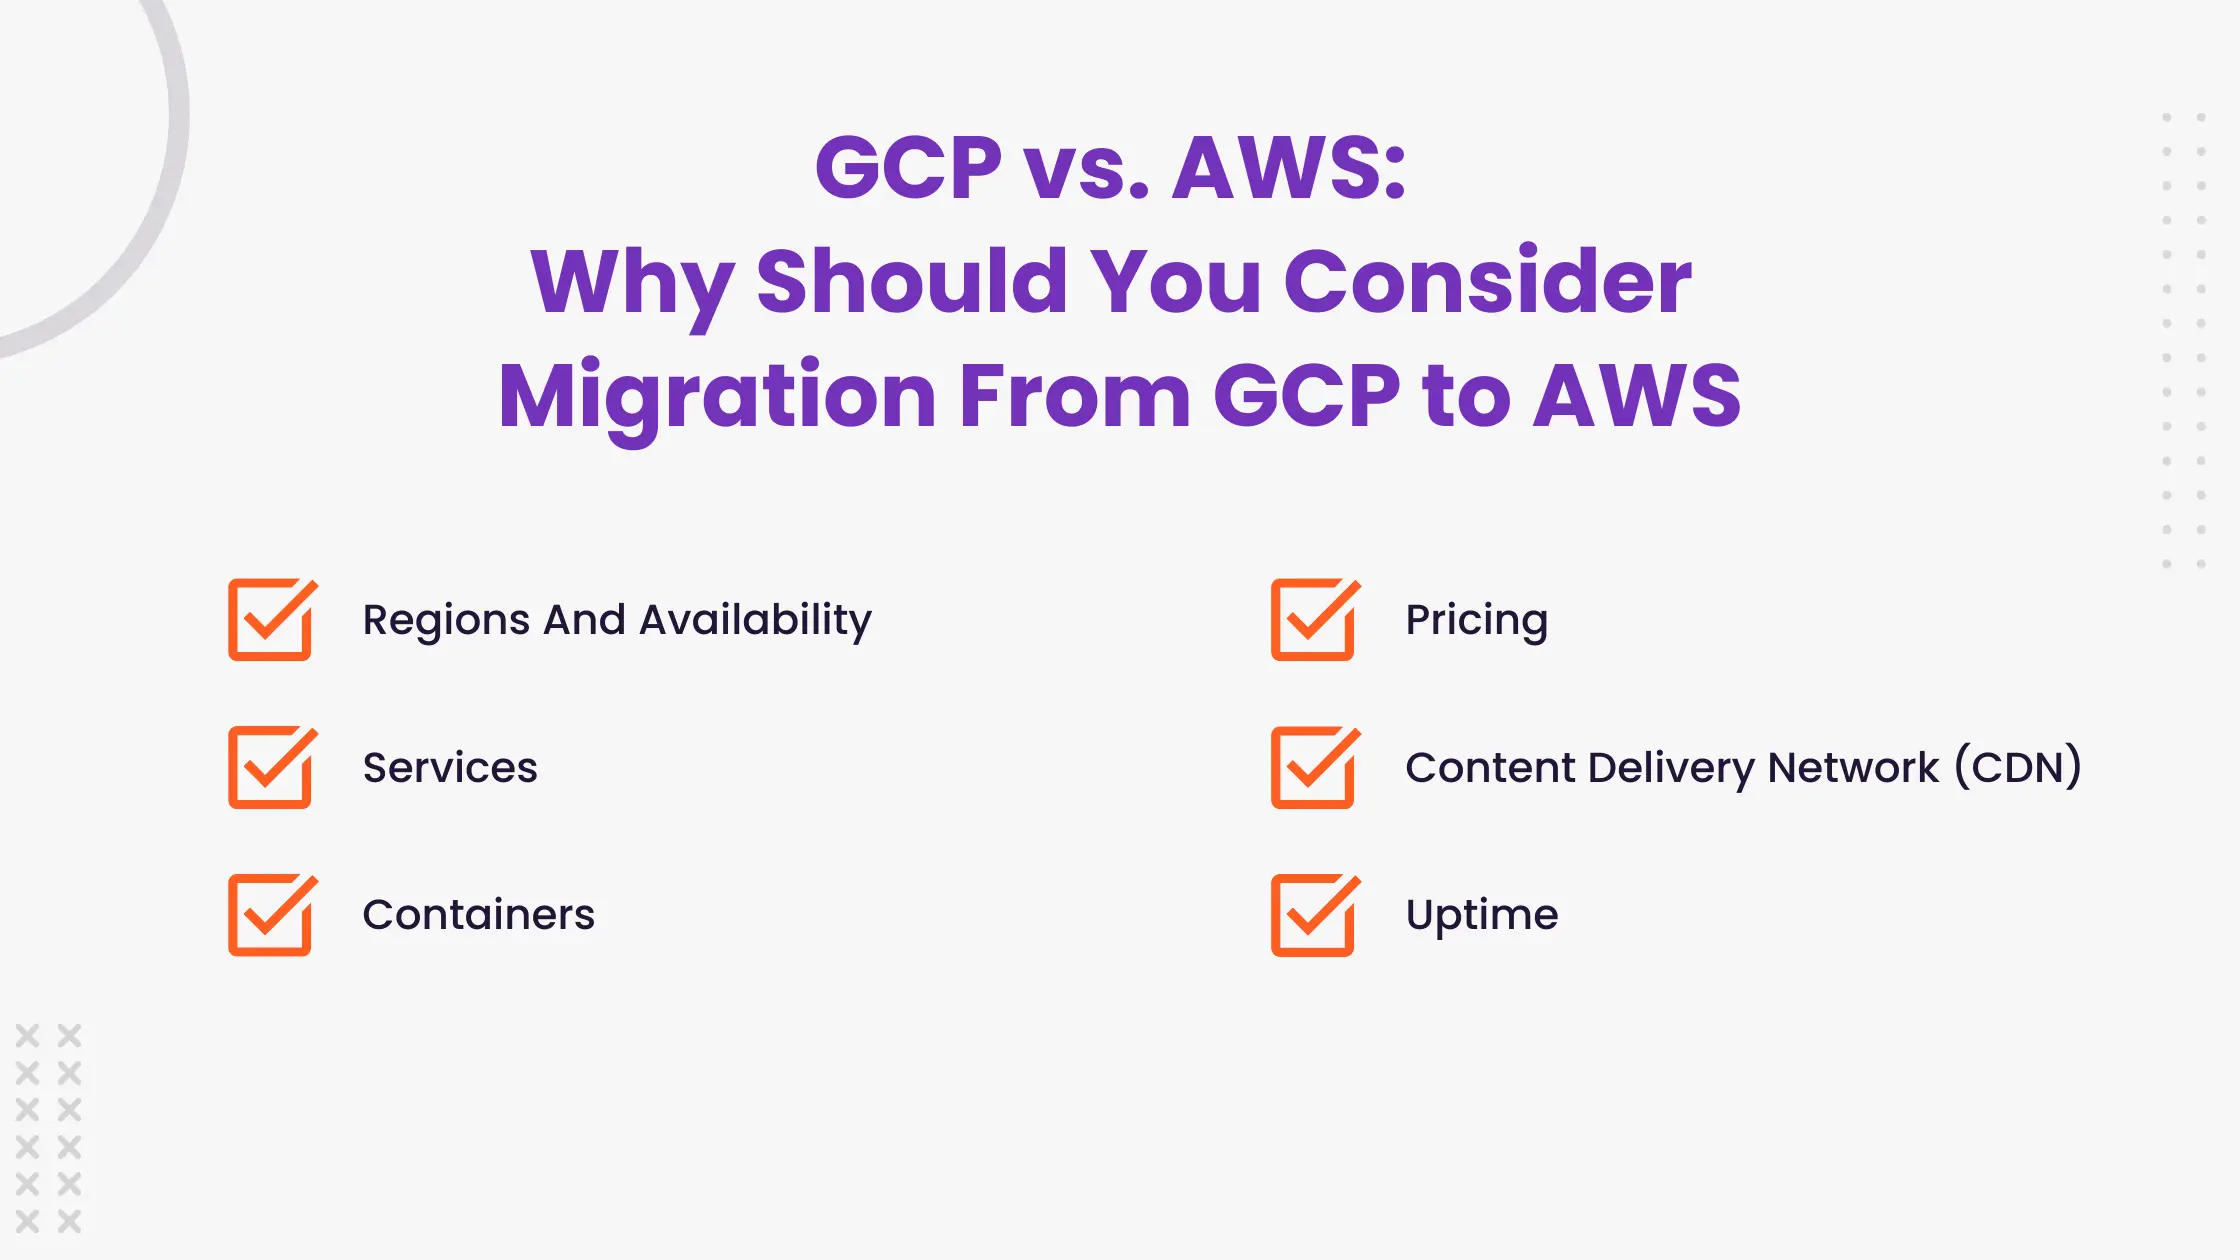 GCP vs. AWS_ Why Should You Consider Migration From GCP to AWS